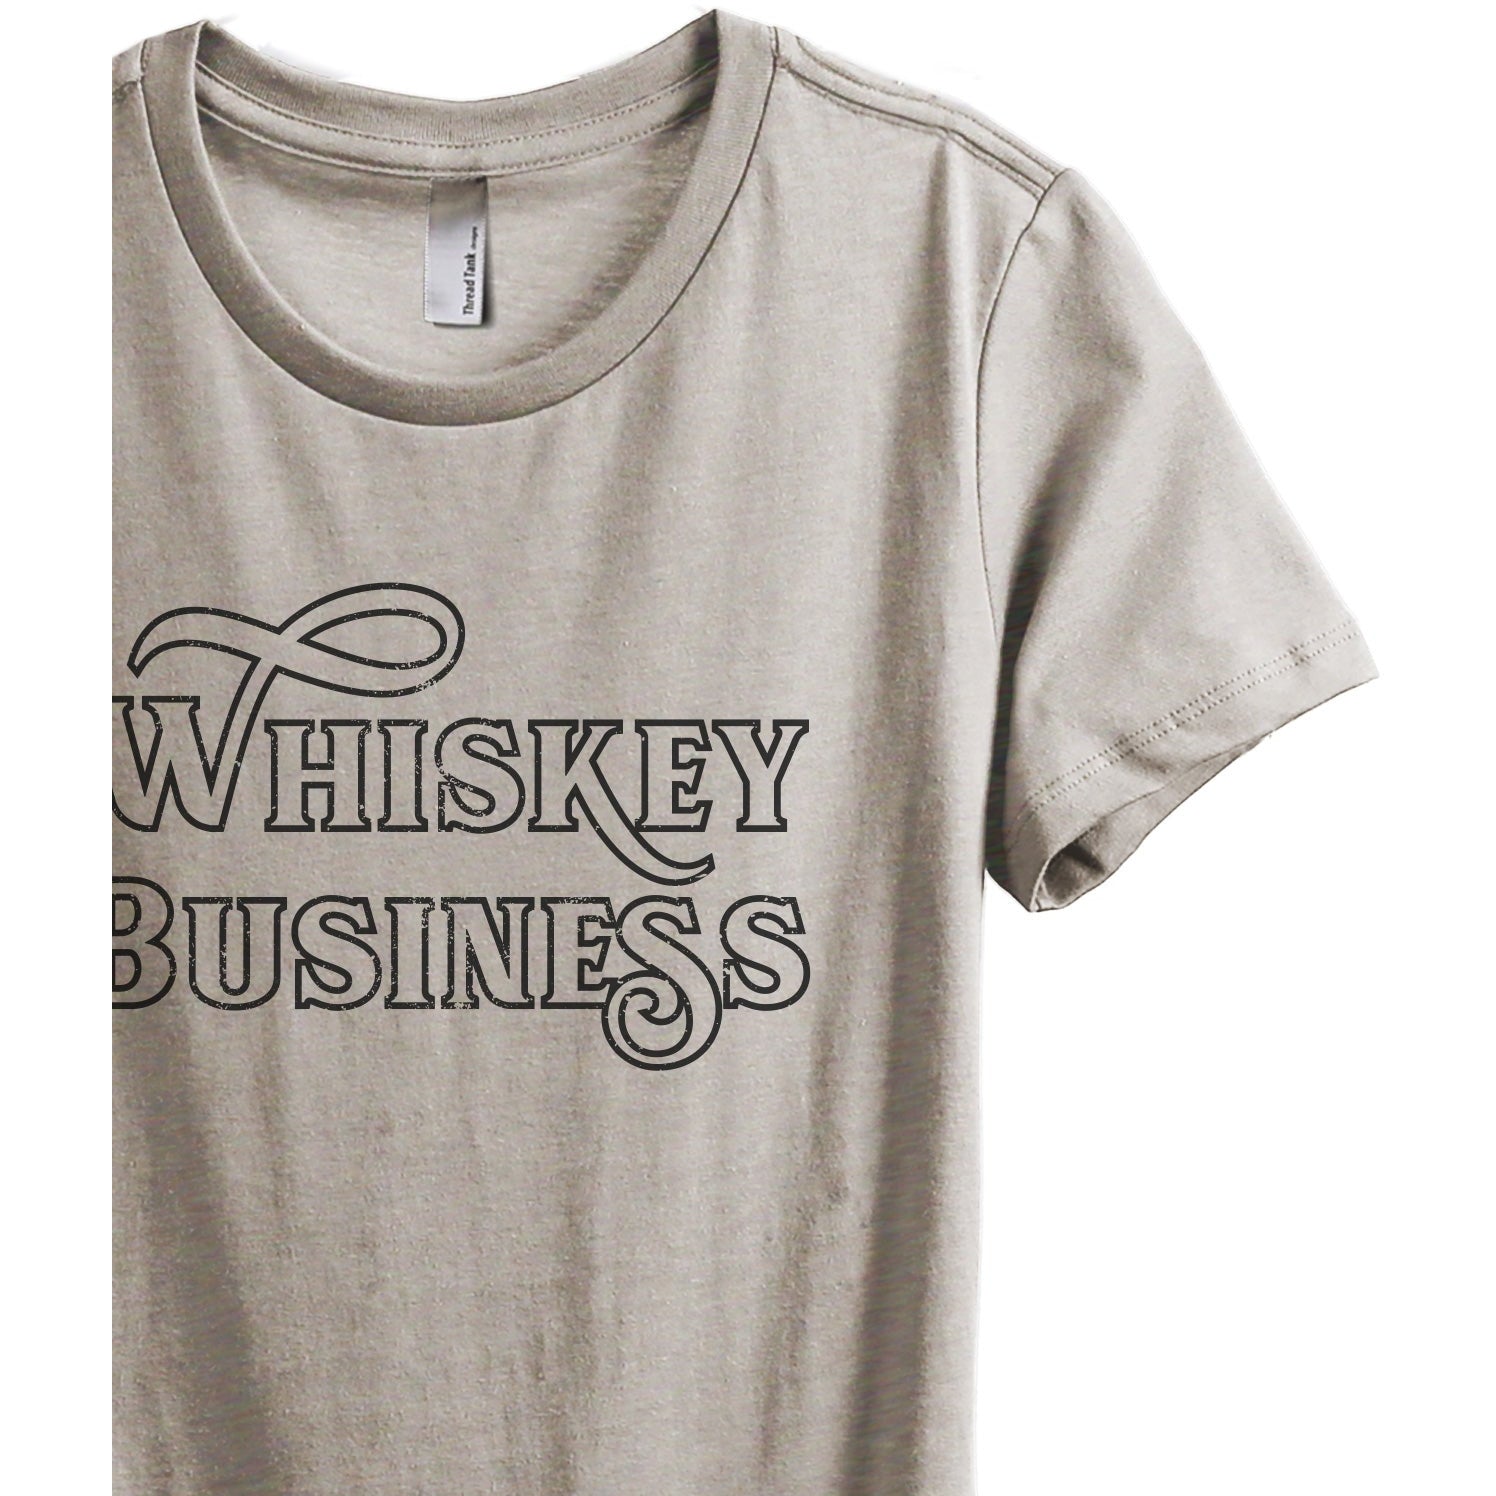 Whiskey Business - Stories You Can Wear